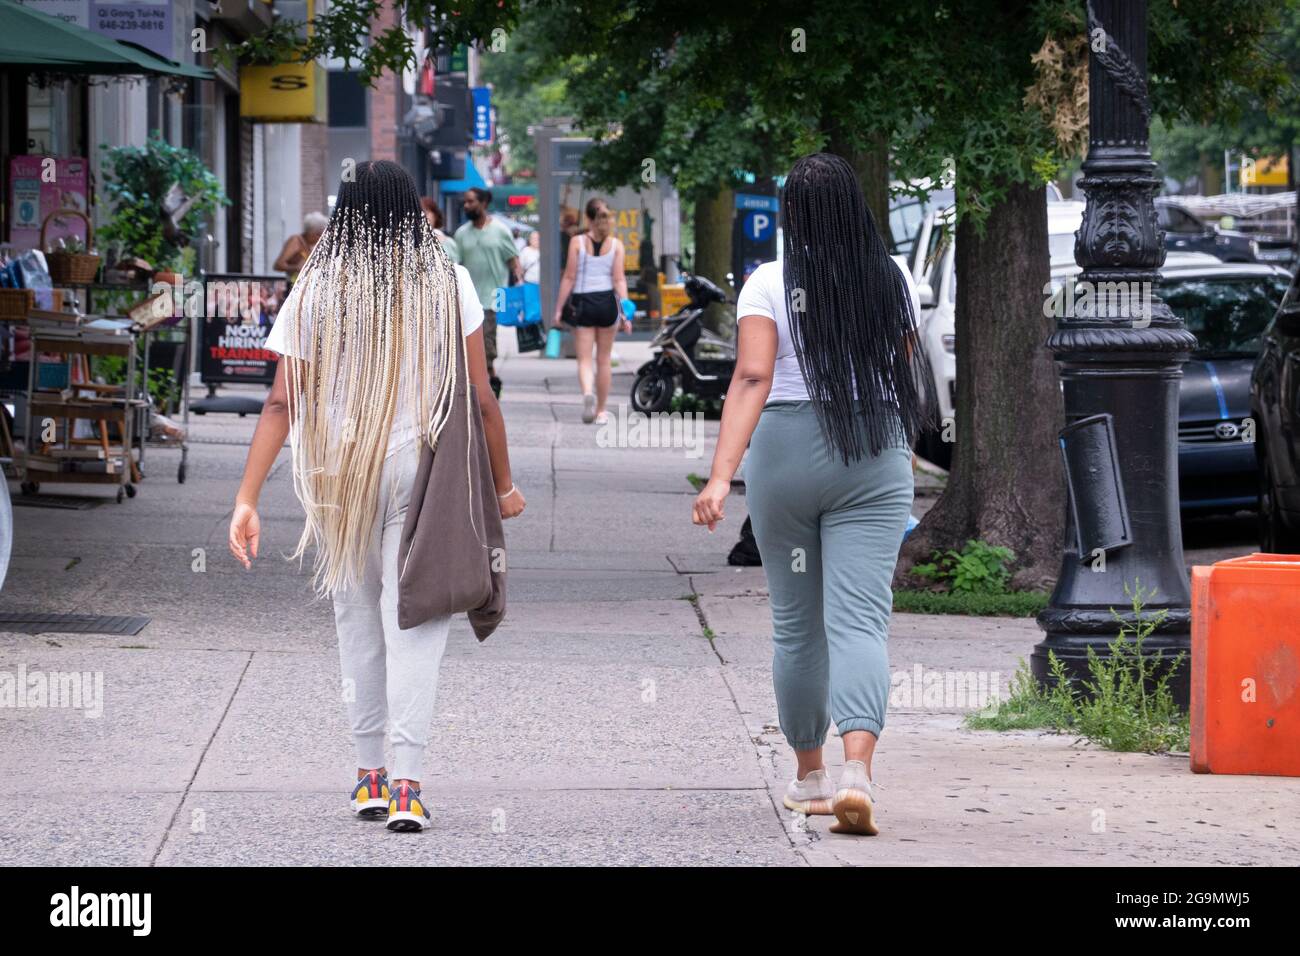 Two women with very long hair extensions walk on Steinway Street in Astoria, Queens, New York, Stock Photo